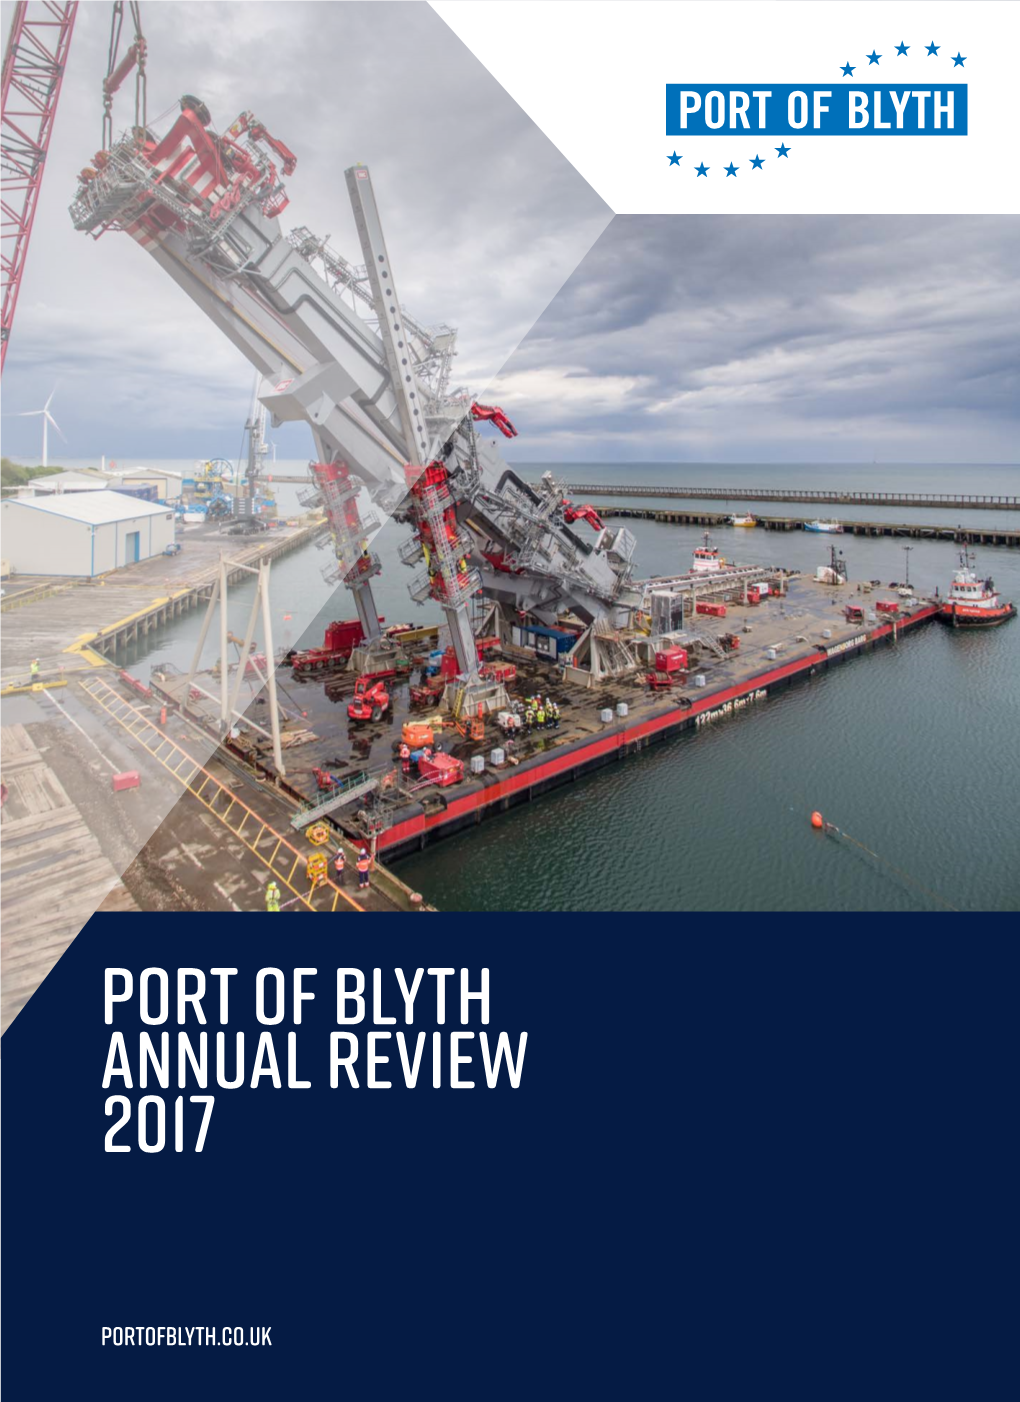 Port of Blyth Annual Review 2017